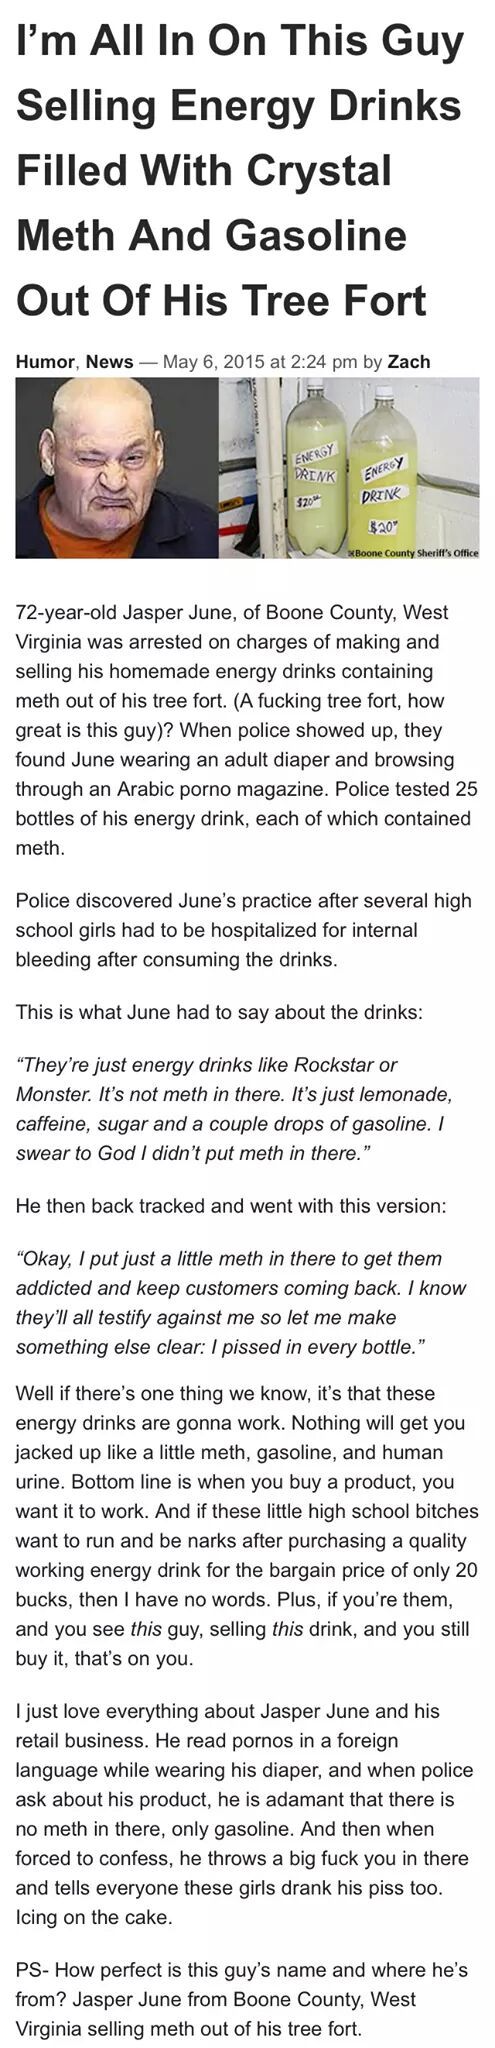 Energy drink made with gasoline, meth, lemonade and a little something special...